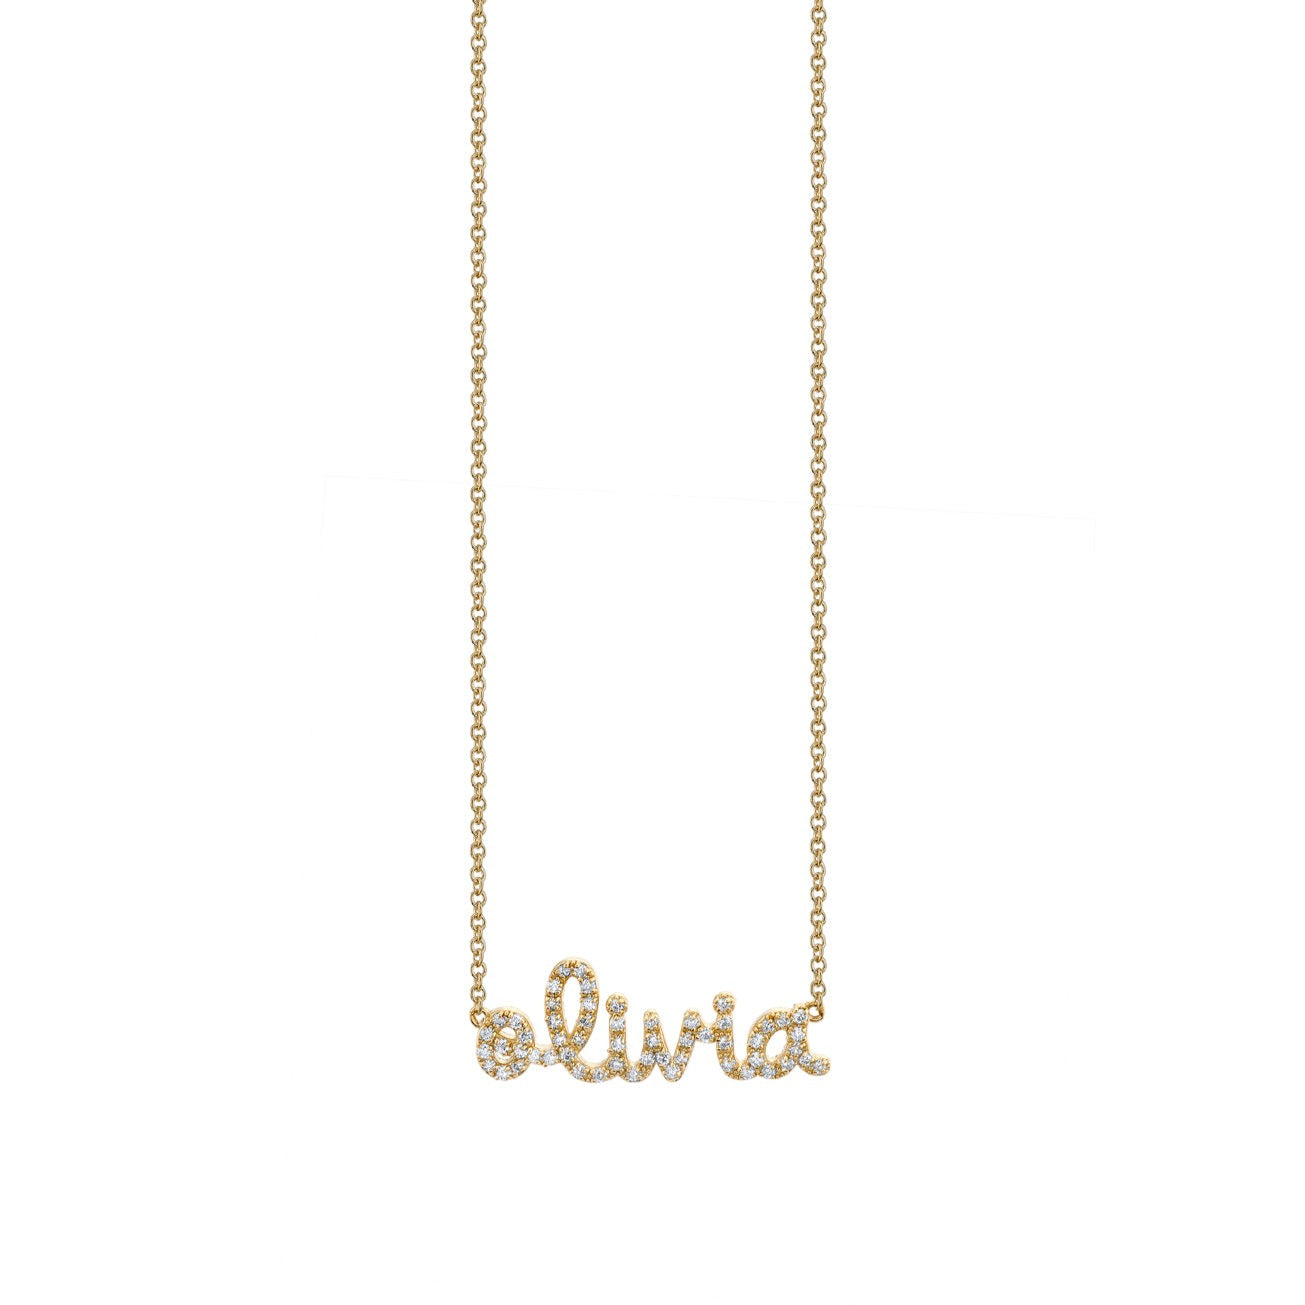 Handmade 3D Nameplate Necklace with Diamond Beading (Order Any Name) -  Yellow Gold, White Gold or Rose Gold